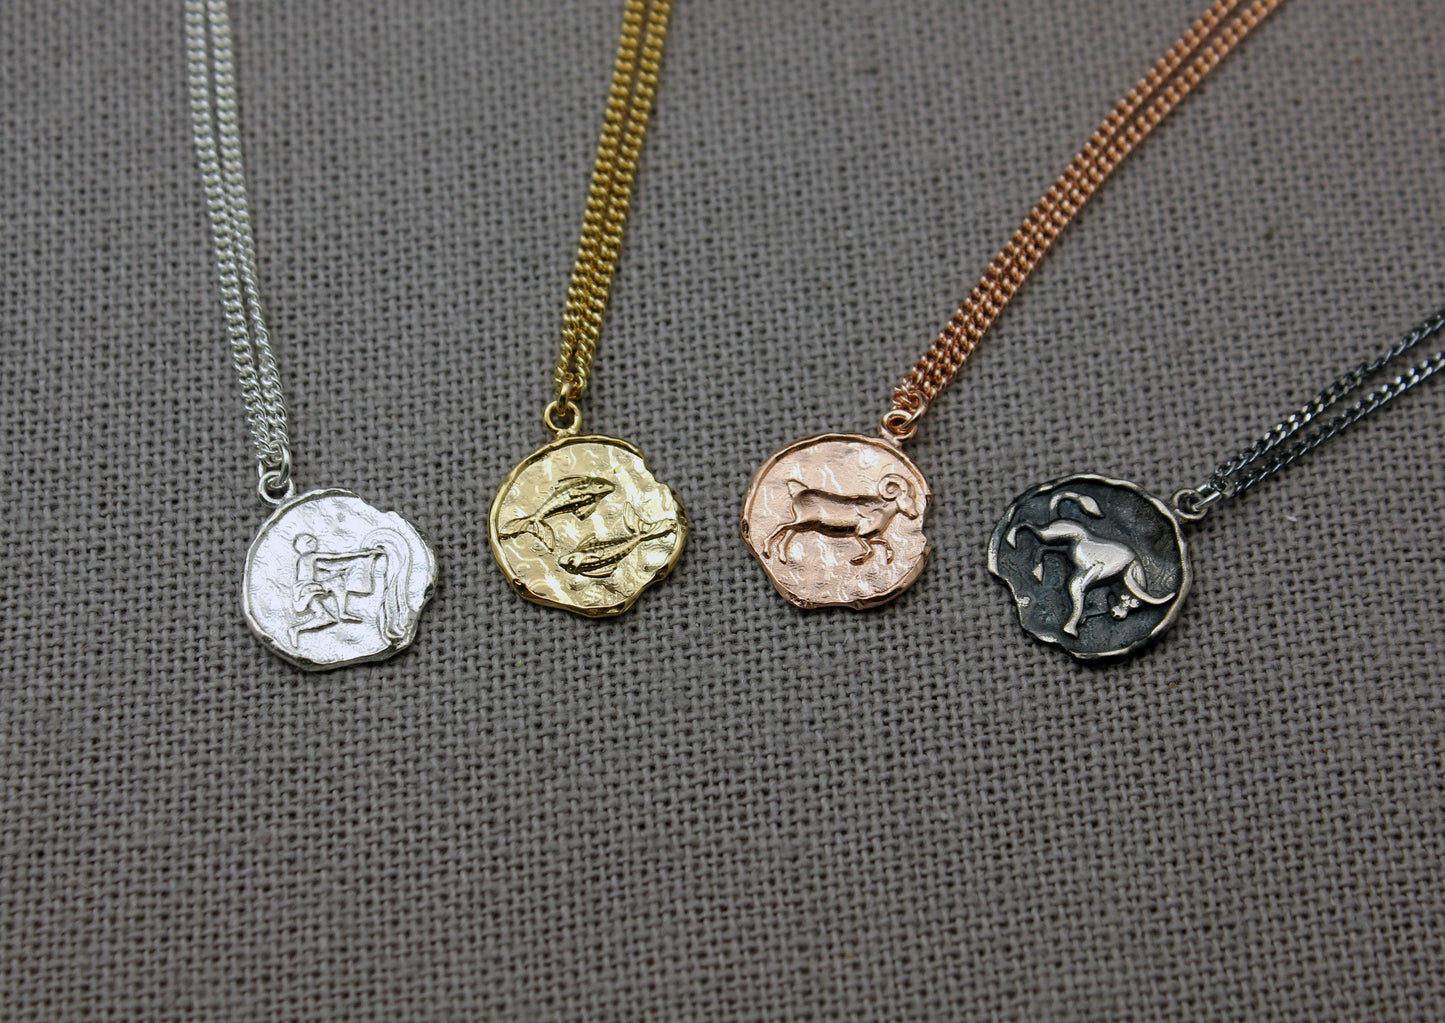 925 sterling silver Zodiac Sign coin Necklace / Constellation Signs medal necklace /Vintage coin necklace